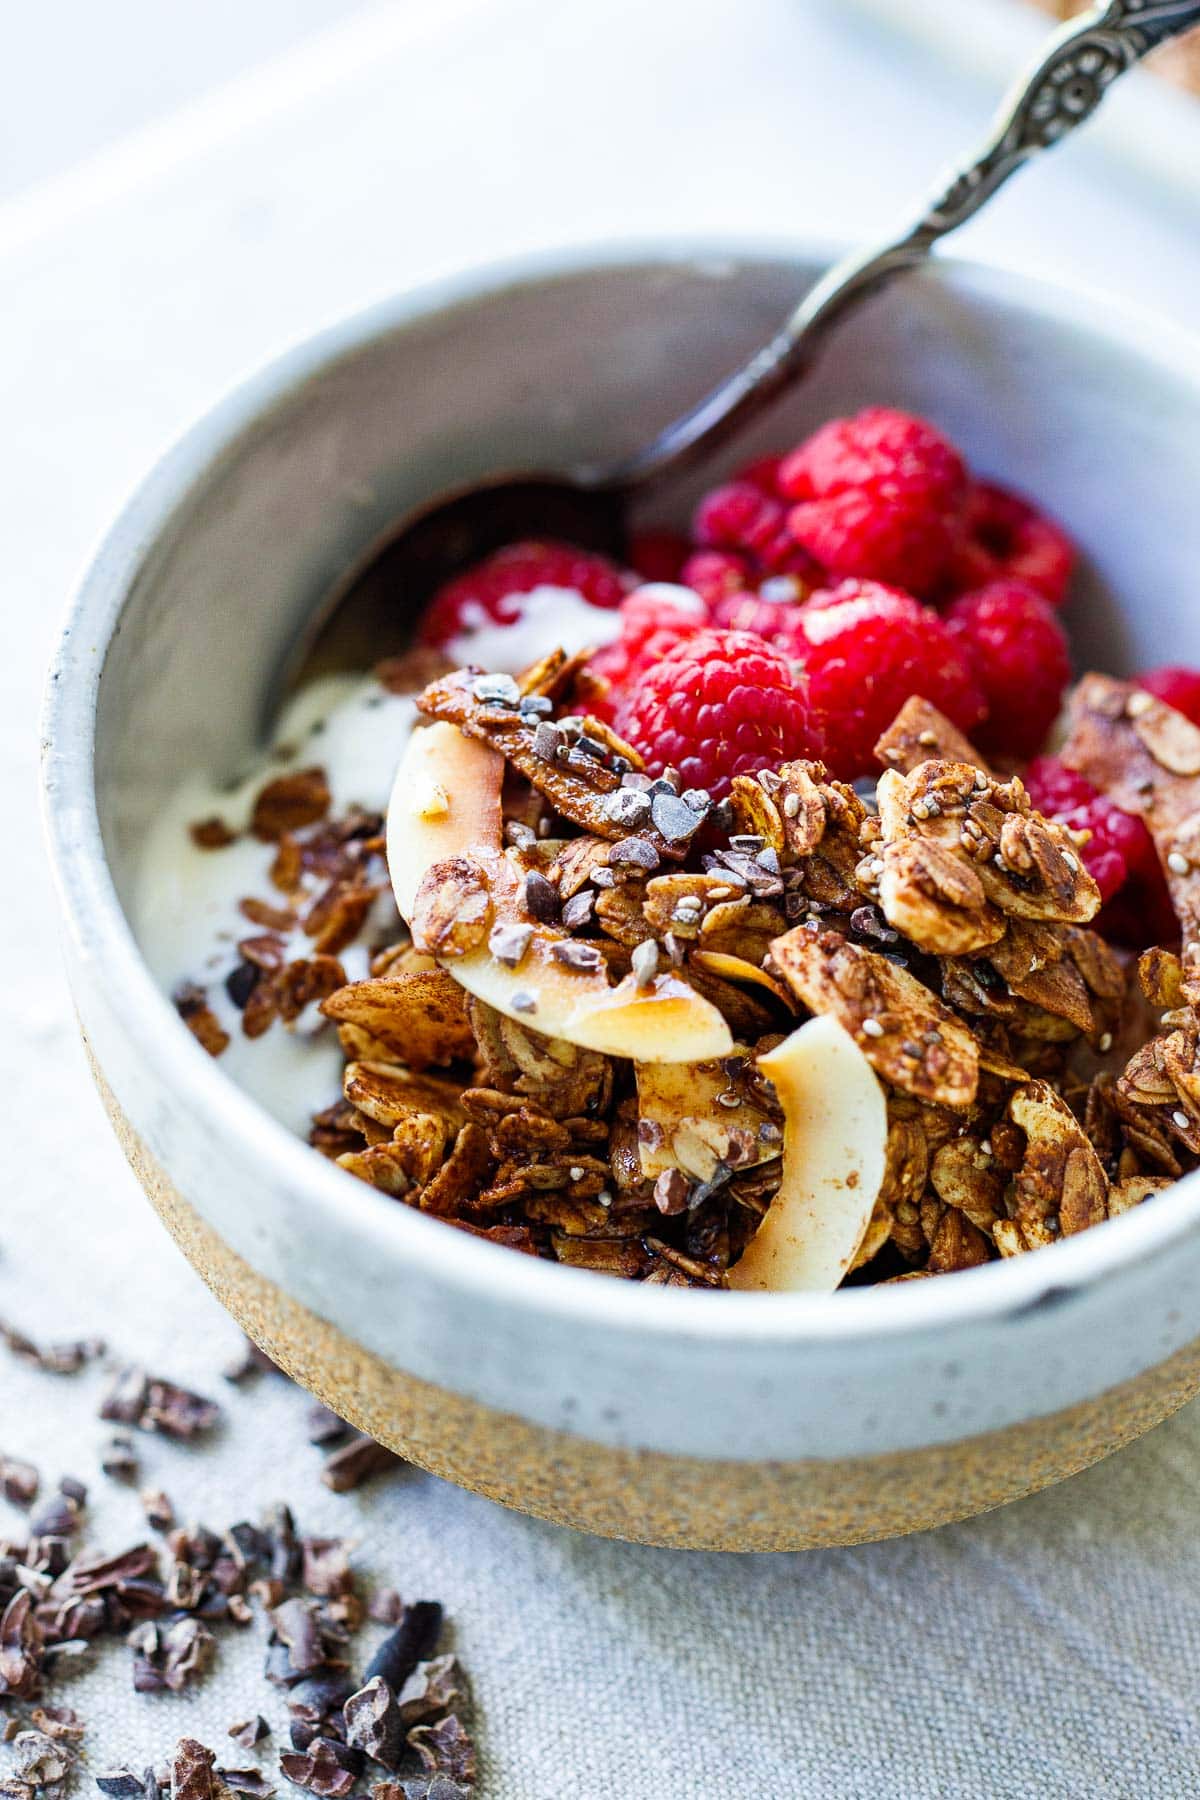 A polyphenol-rich Chocolate Granola recipe made with cacao nibs, cacao powder, Ceylon cinnamon and olive oil - superfoods that heal and nourish the body. Delicious for breakfast or dessert! Vegan.